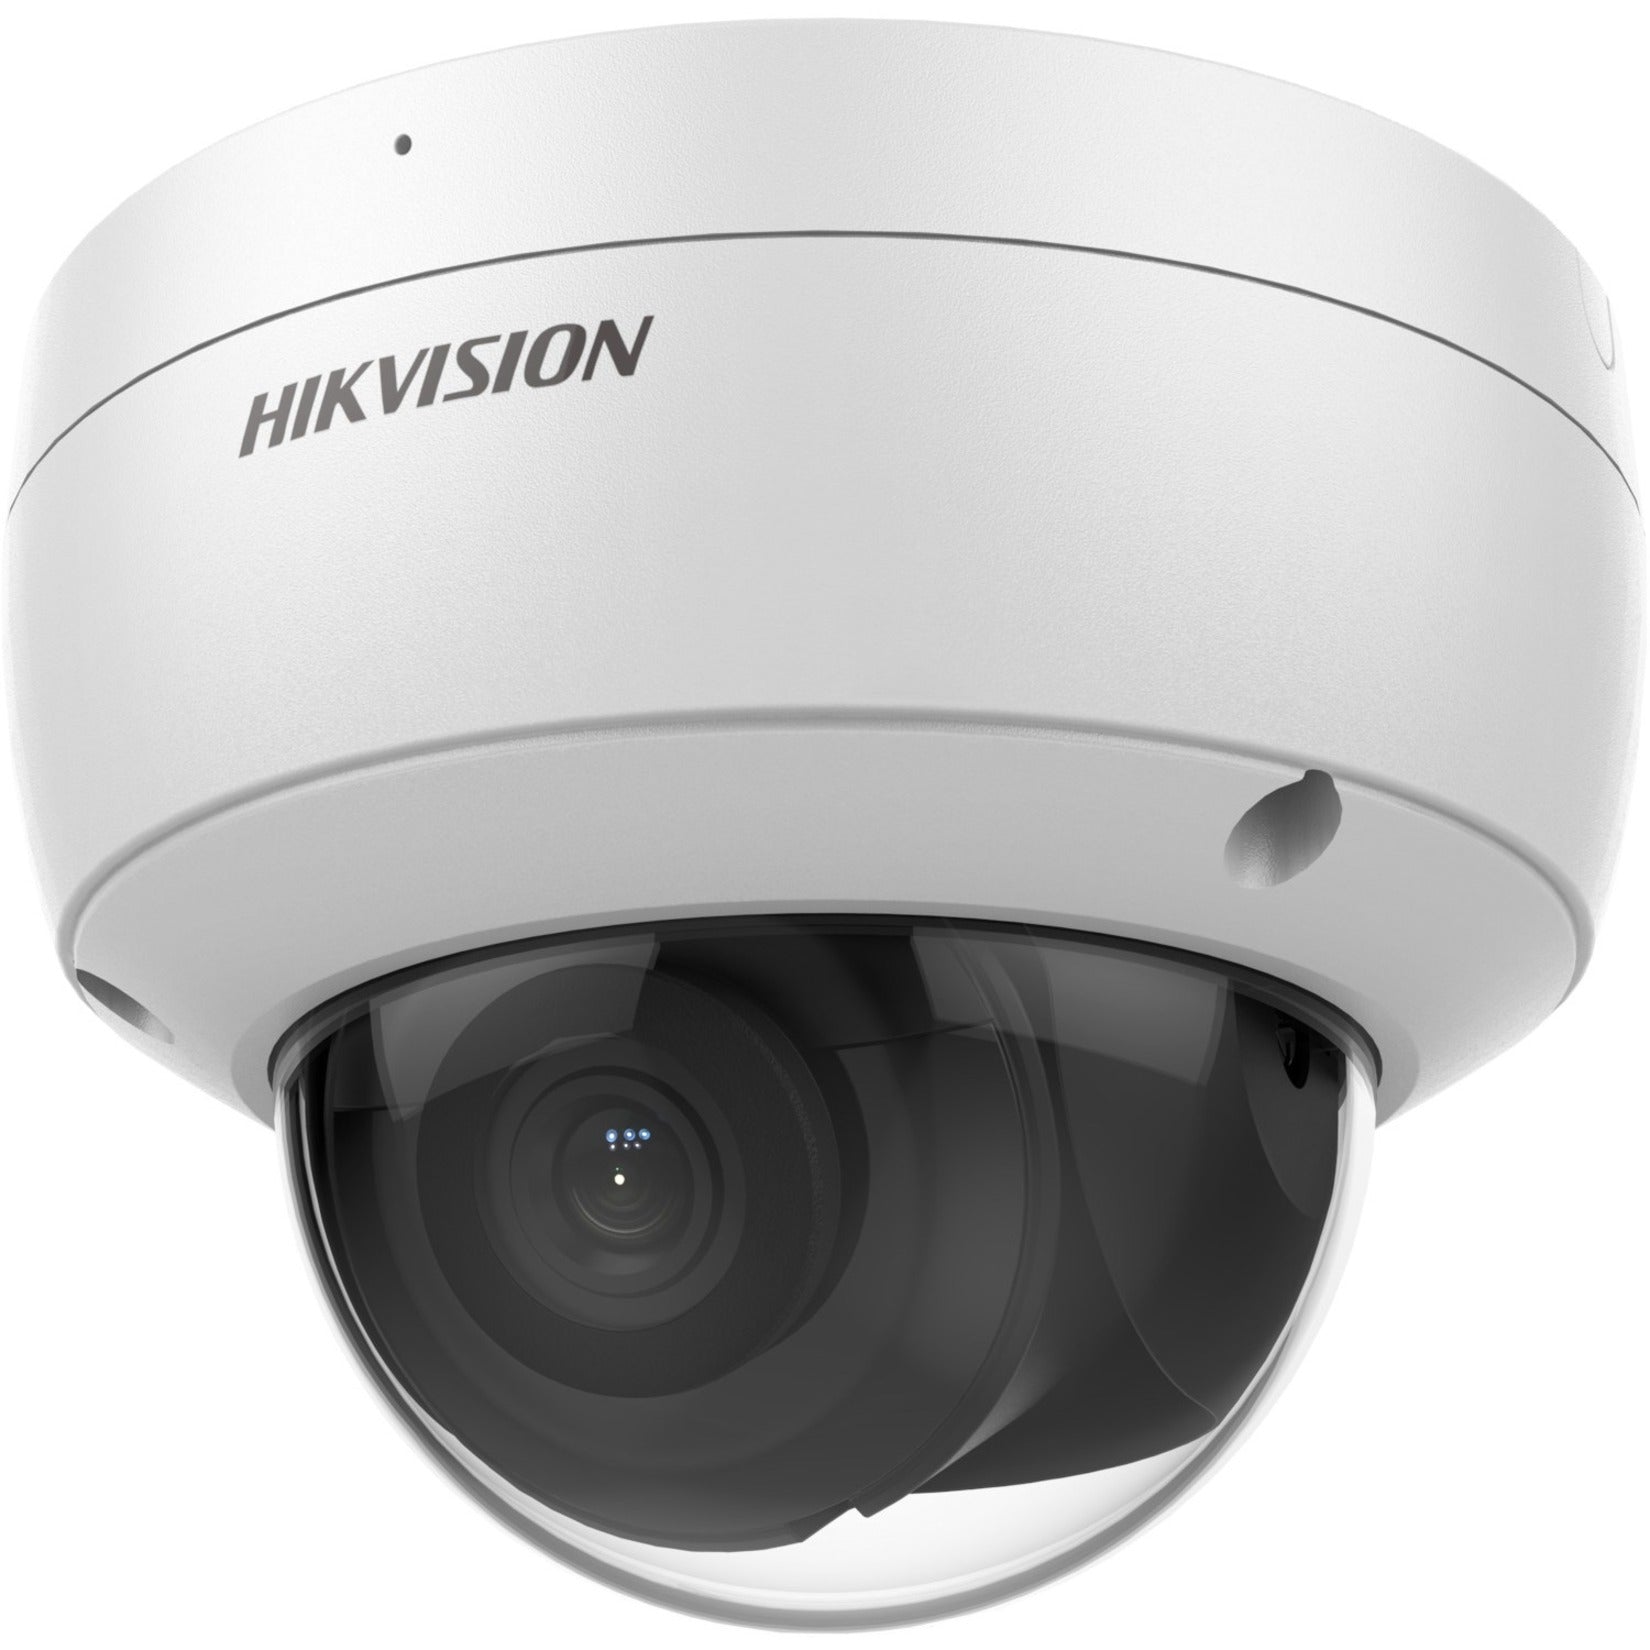 Hikvision DS-2CD2183G2-IU 2.8MM 8 MP AcuSense Vandal Fixed Dome Network Camera, 4K, Night Vision, Motion Detection